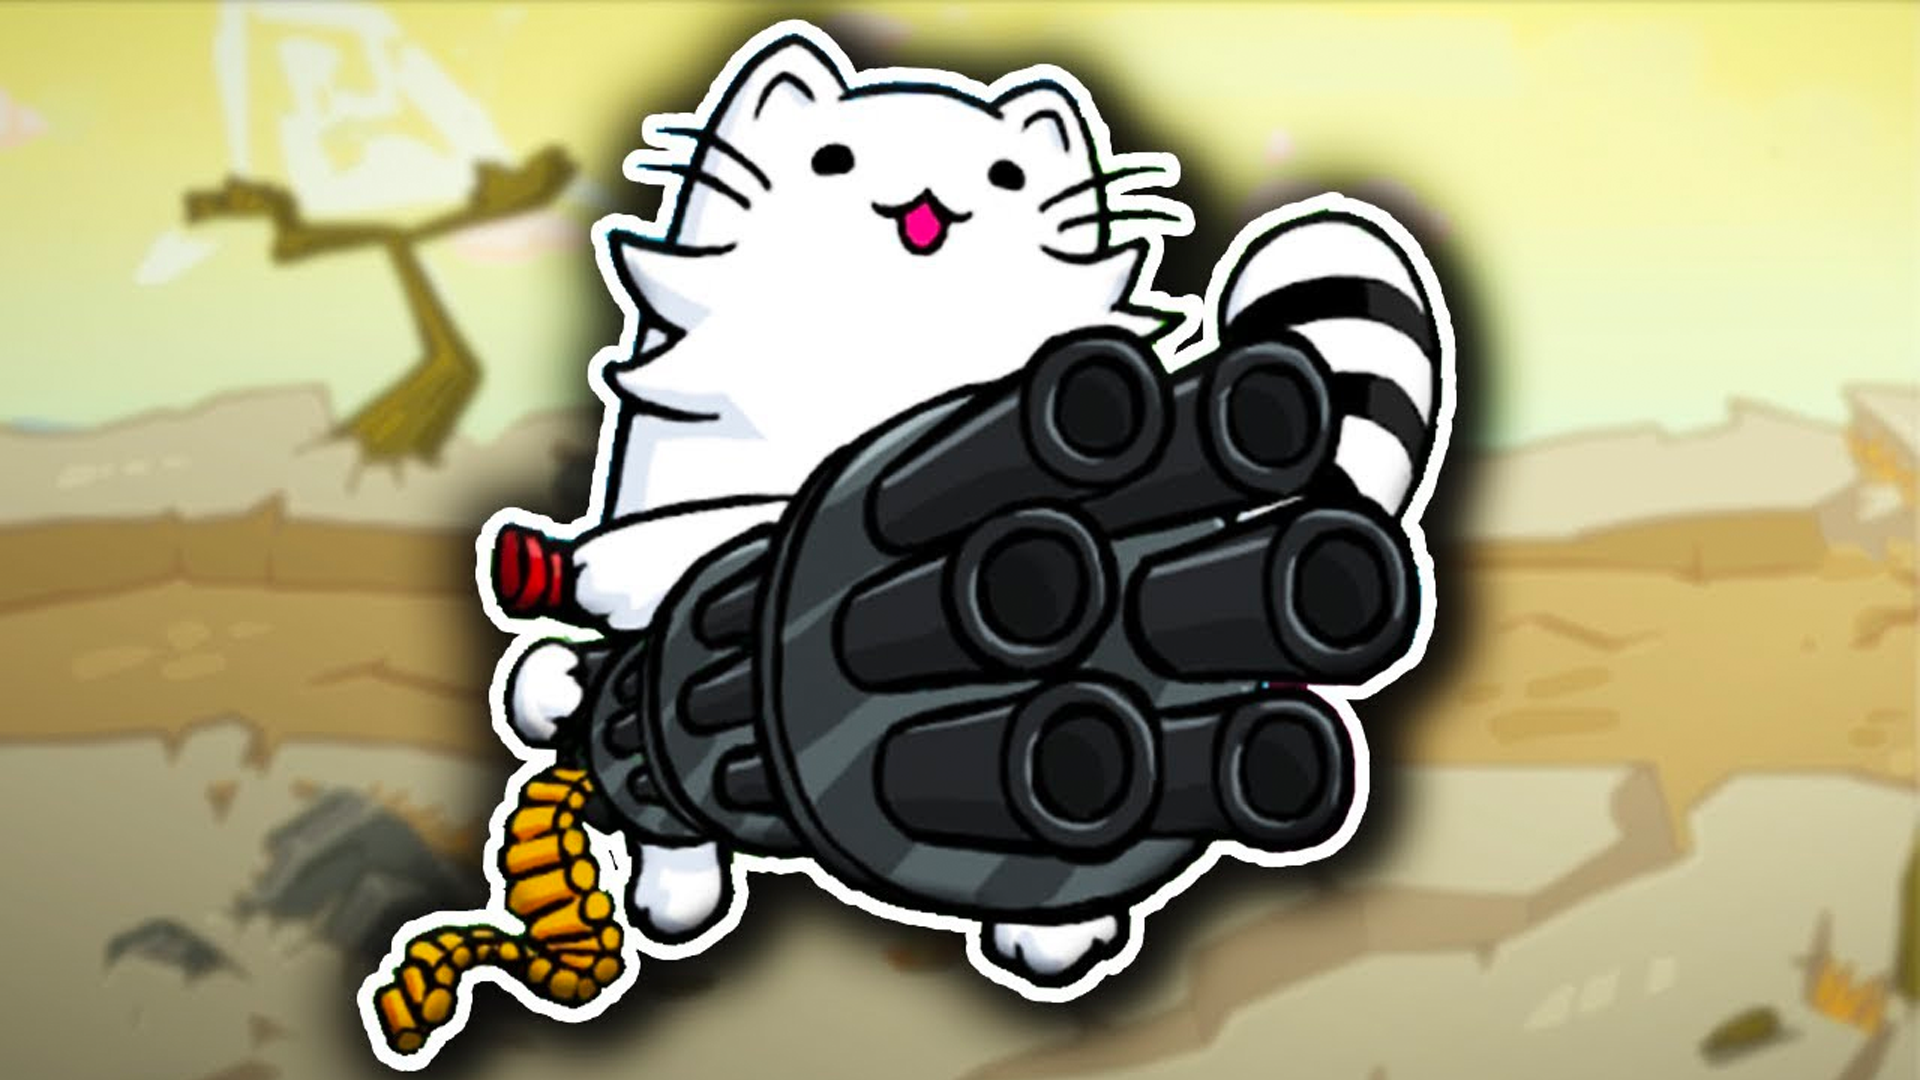 Super Cat Gun: Adventure World for Android - Free App Download